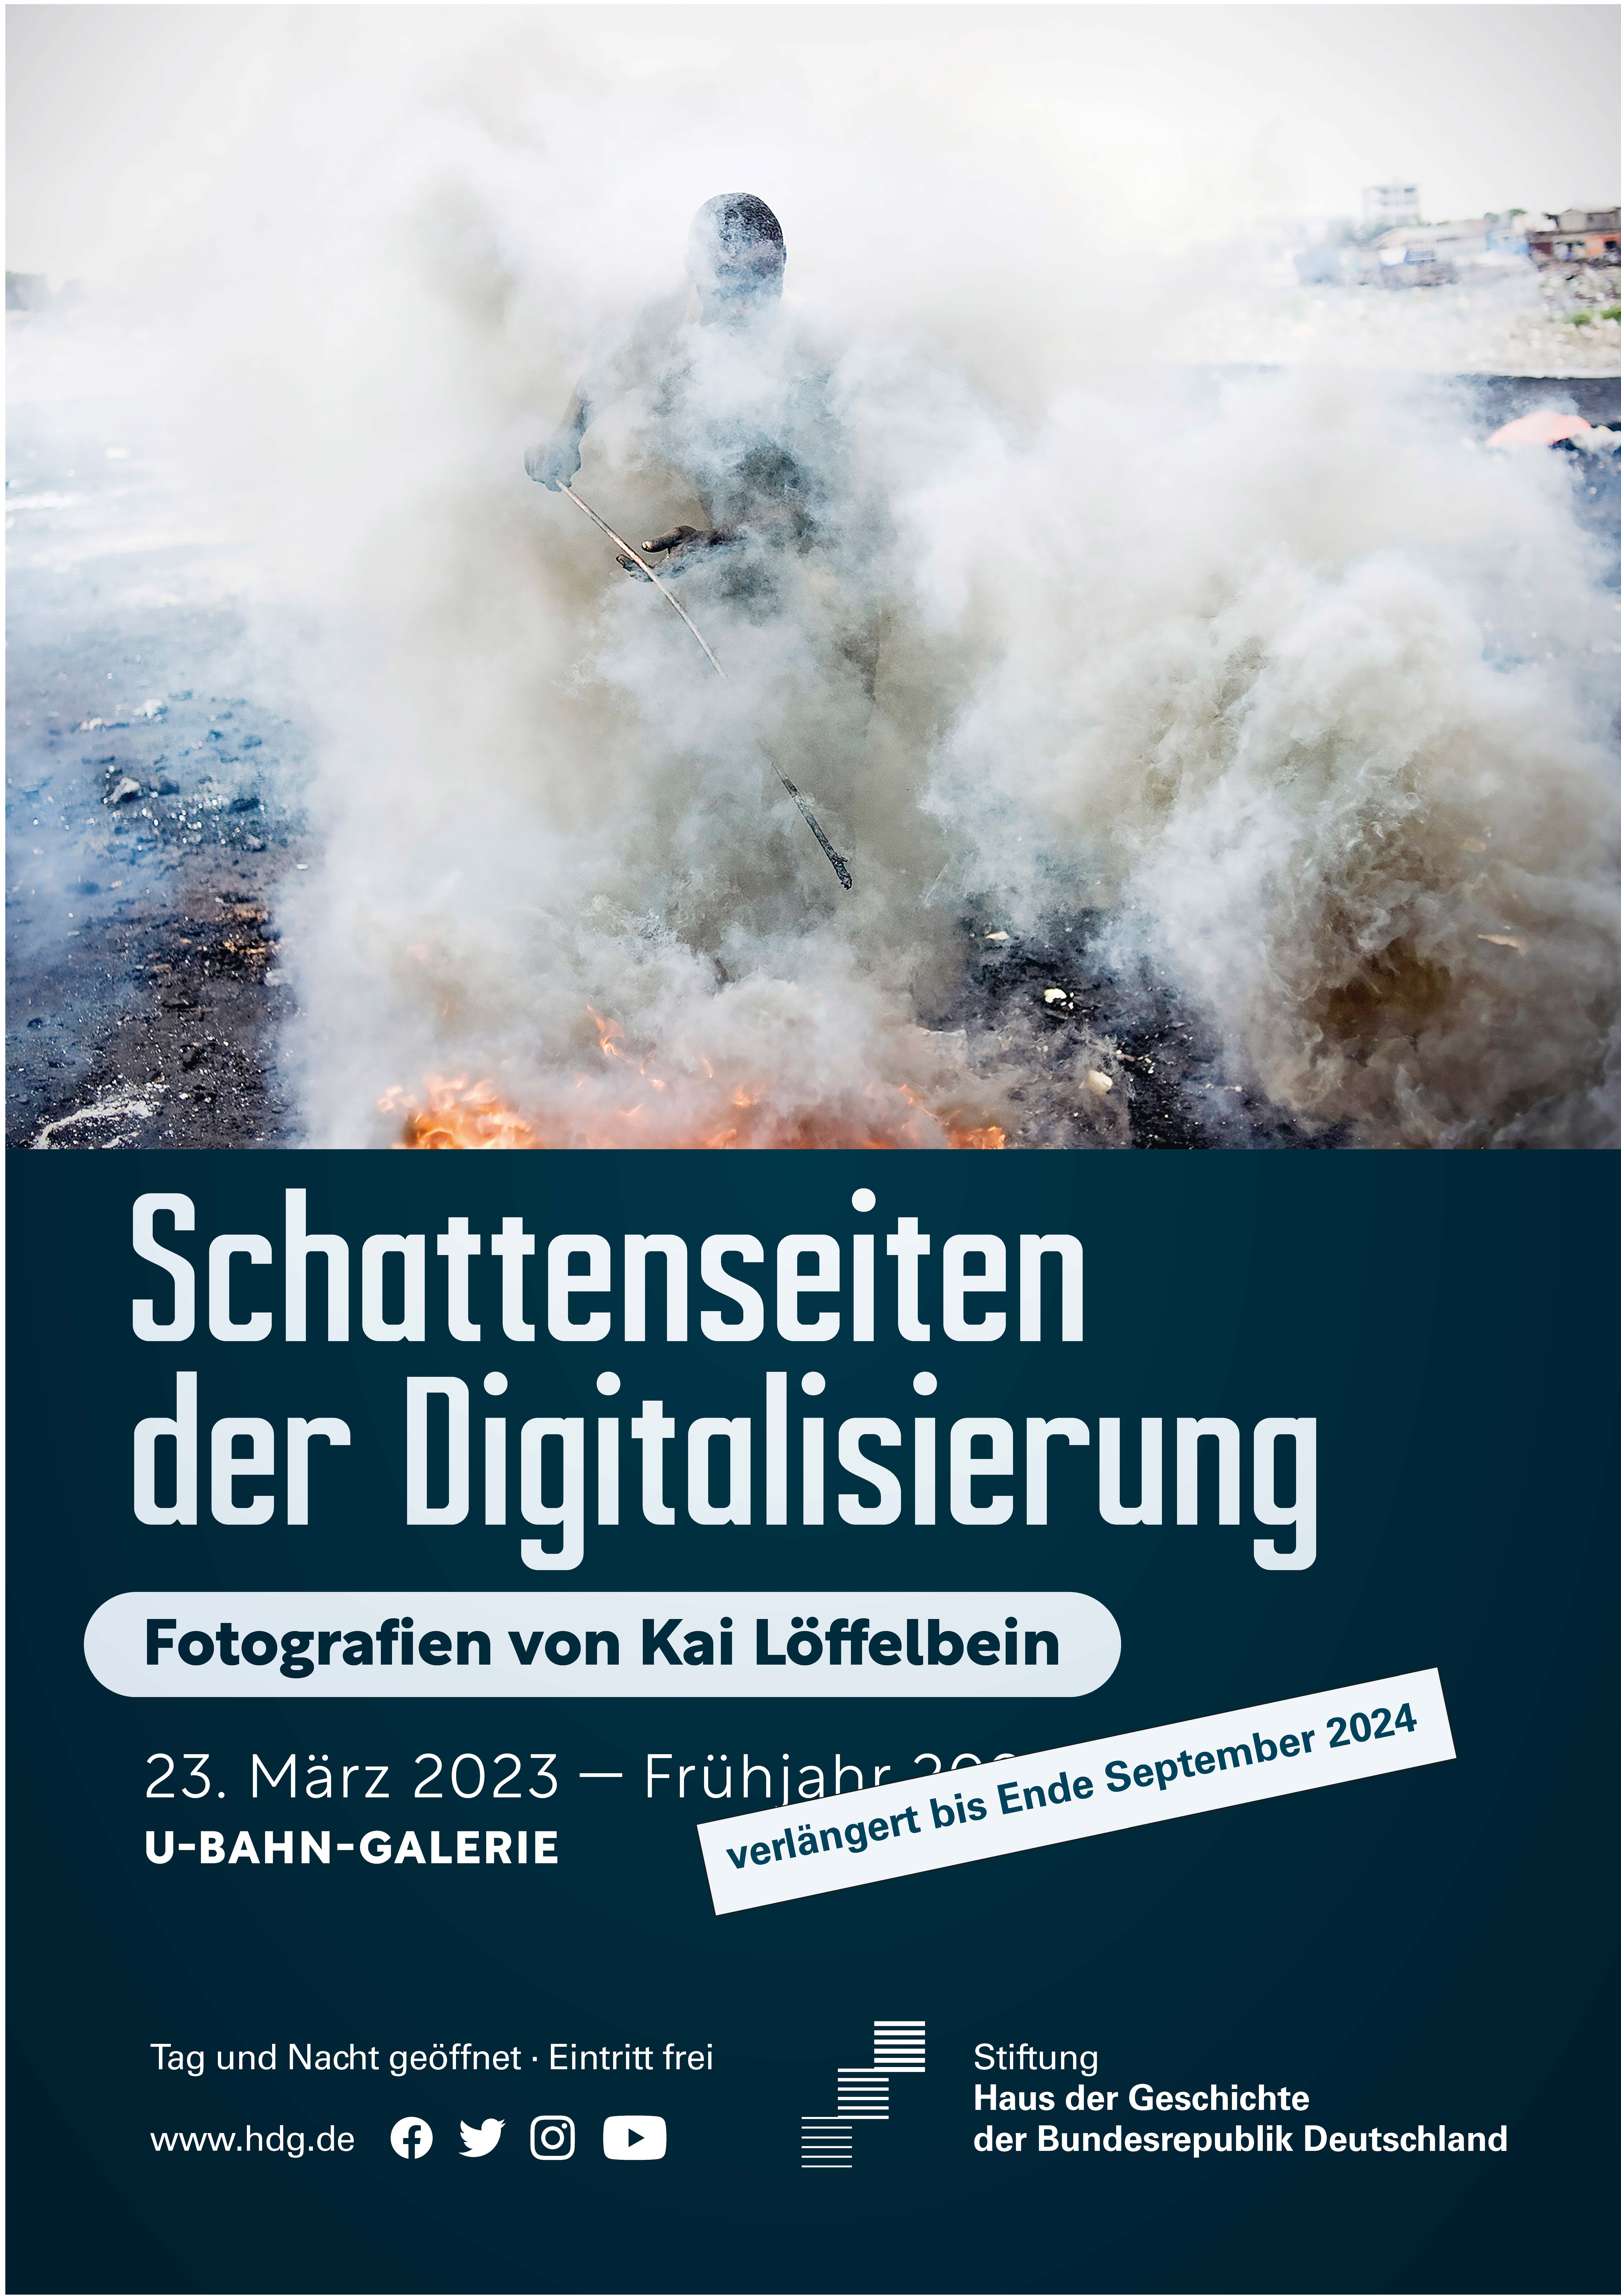 Poster for the exhibition "A Downside of Digitalisation"